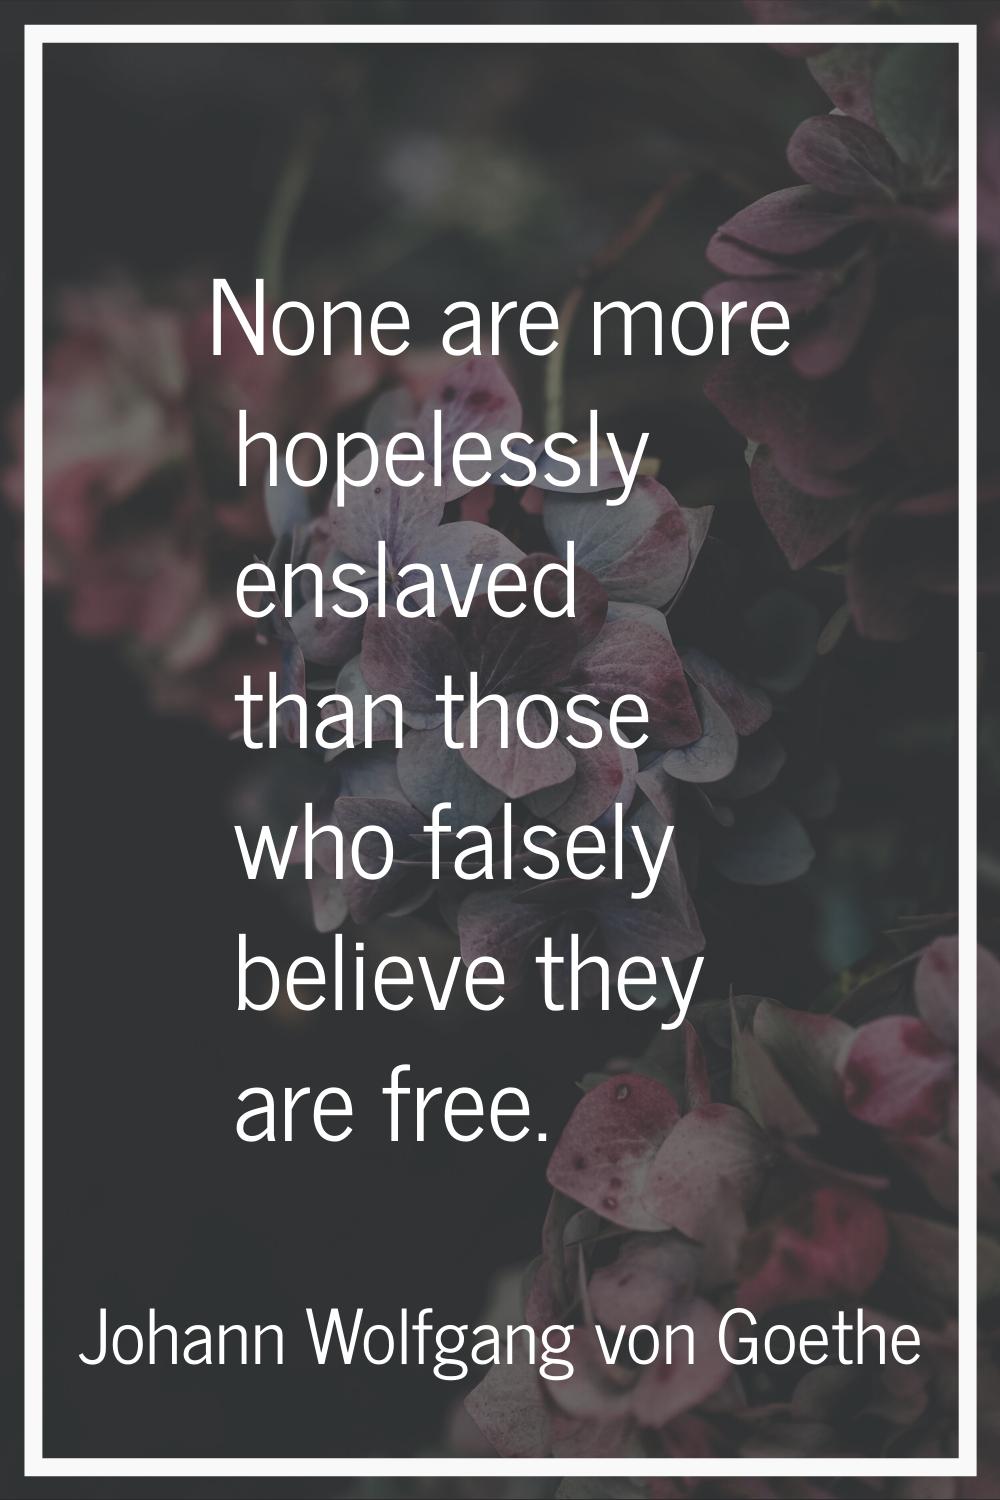 None are more hopelessly enslaved than those who falsely believe they are free.